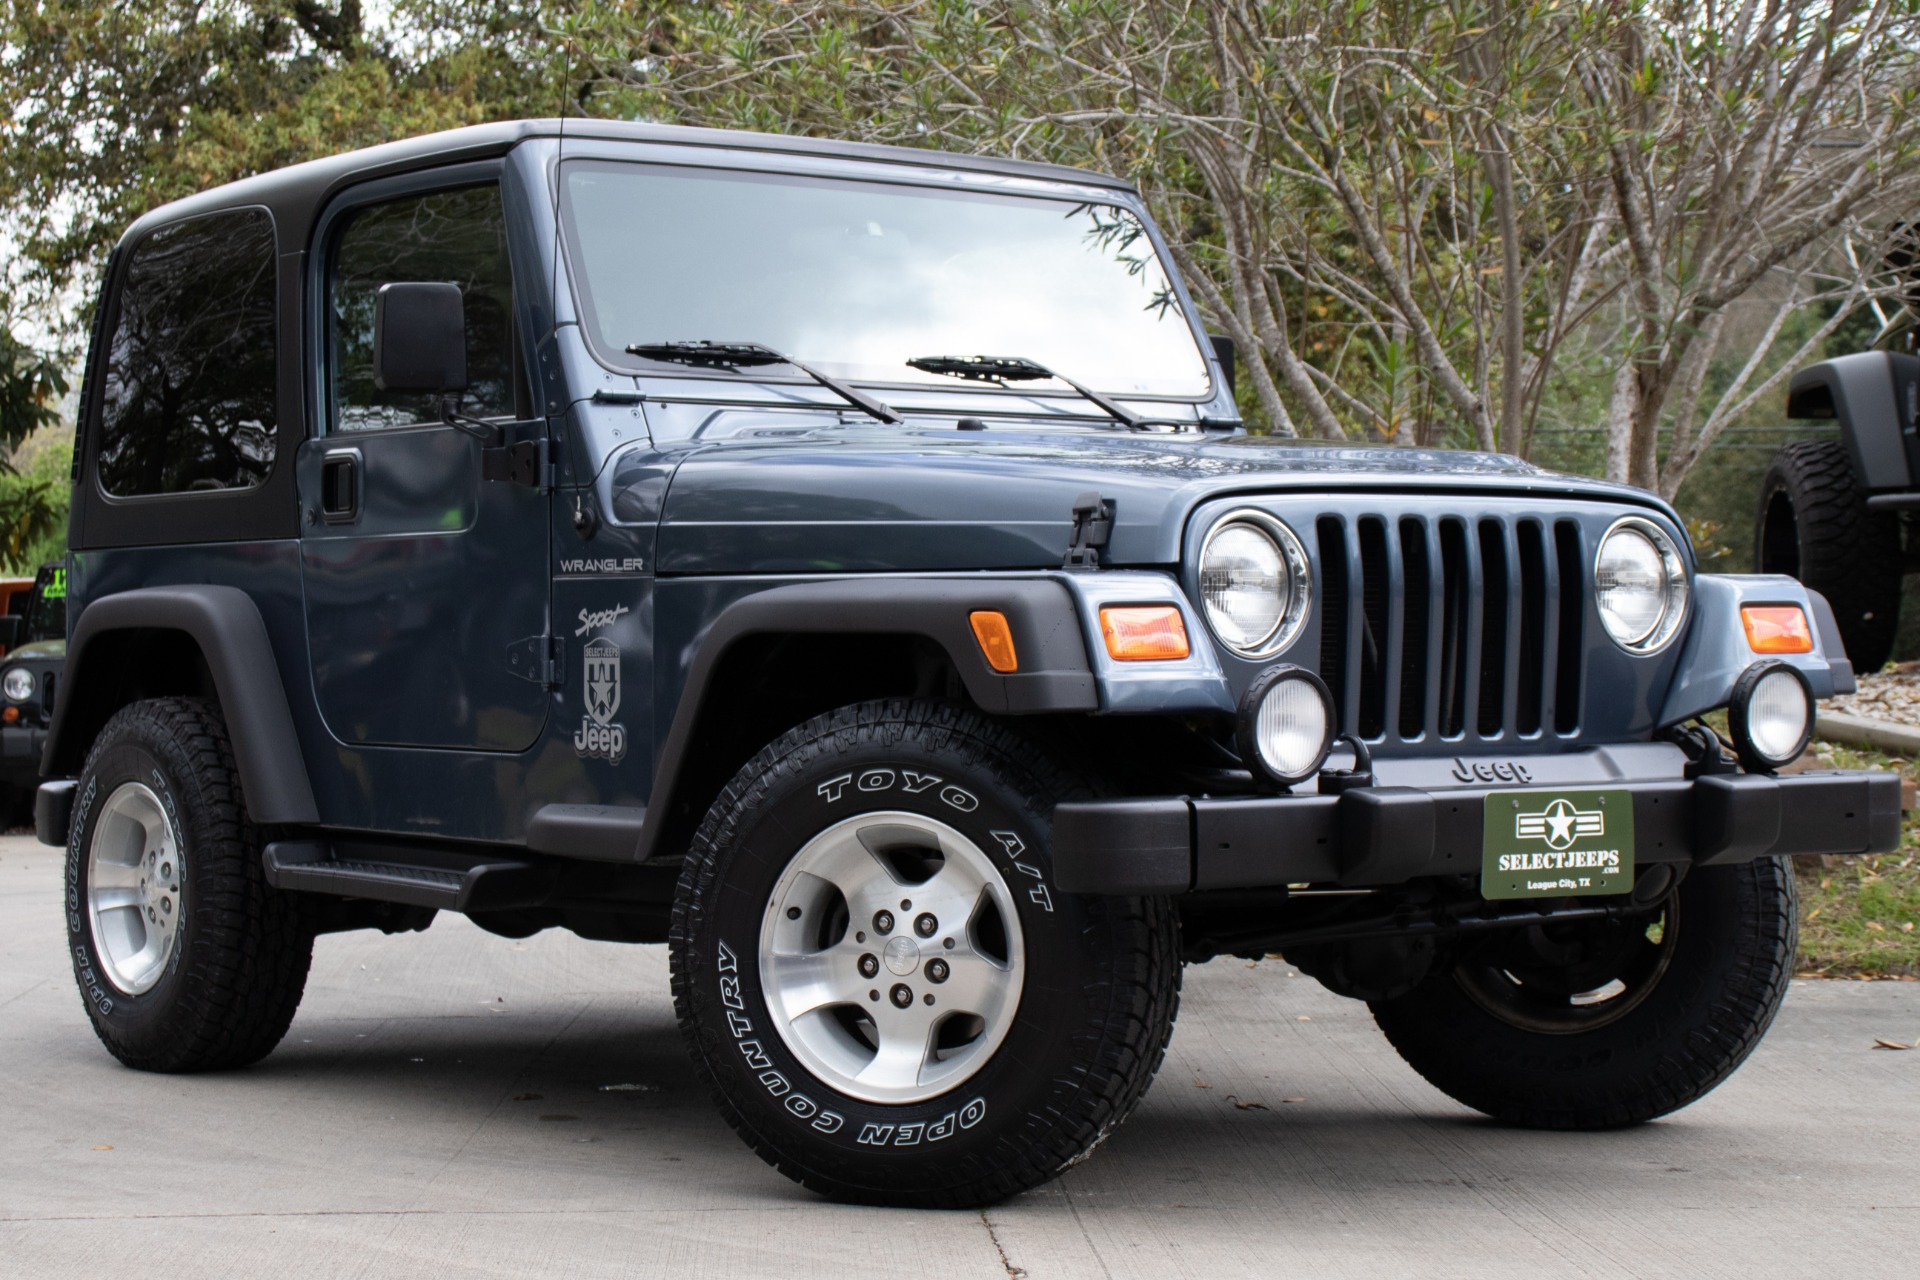 Used 2002 Jeep Wrangler Sport For Sale ($23,995) | Select Jeeps Inc. Stock  #707190